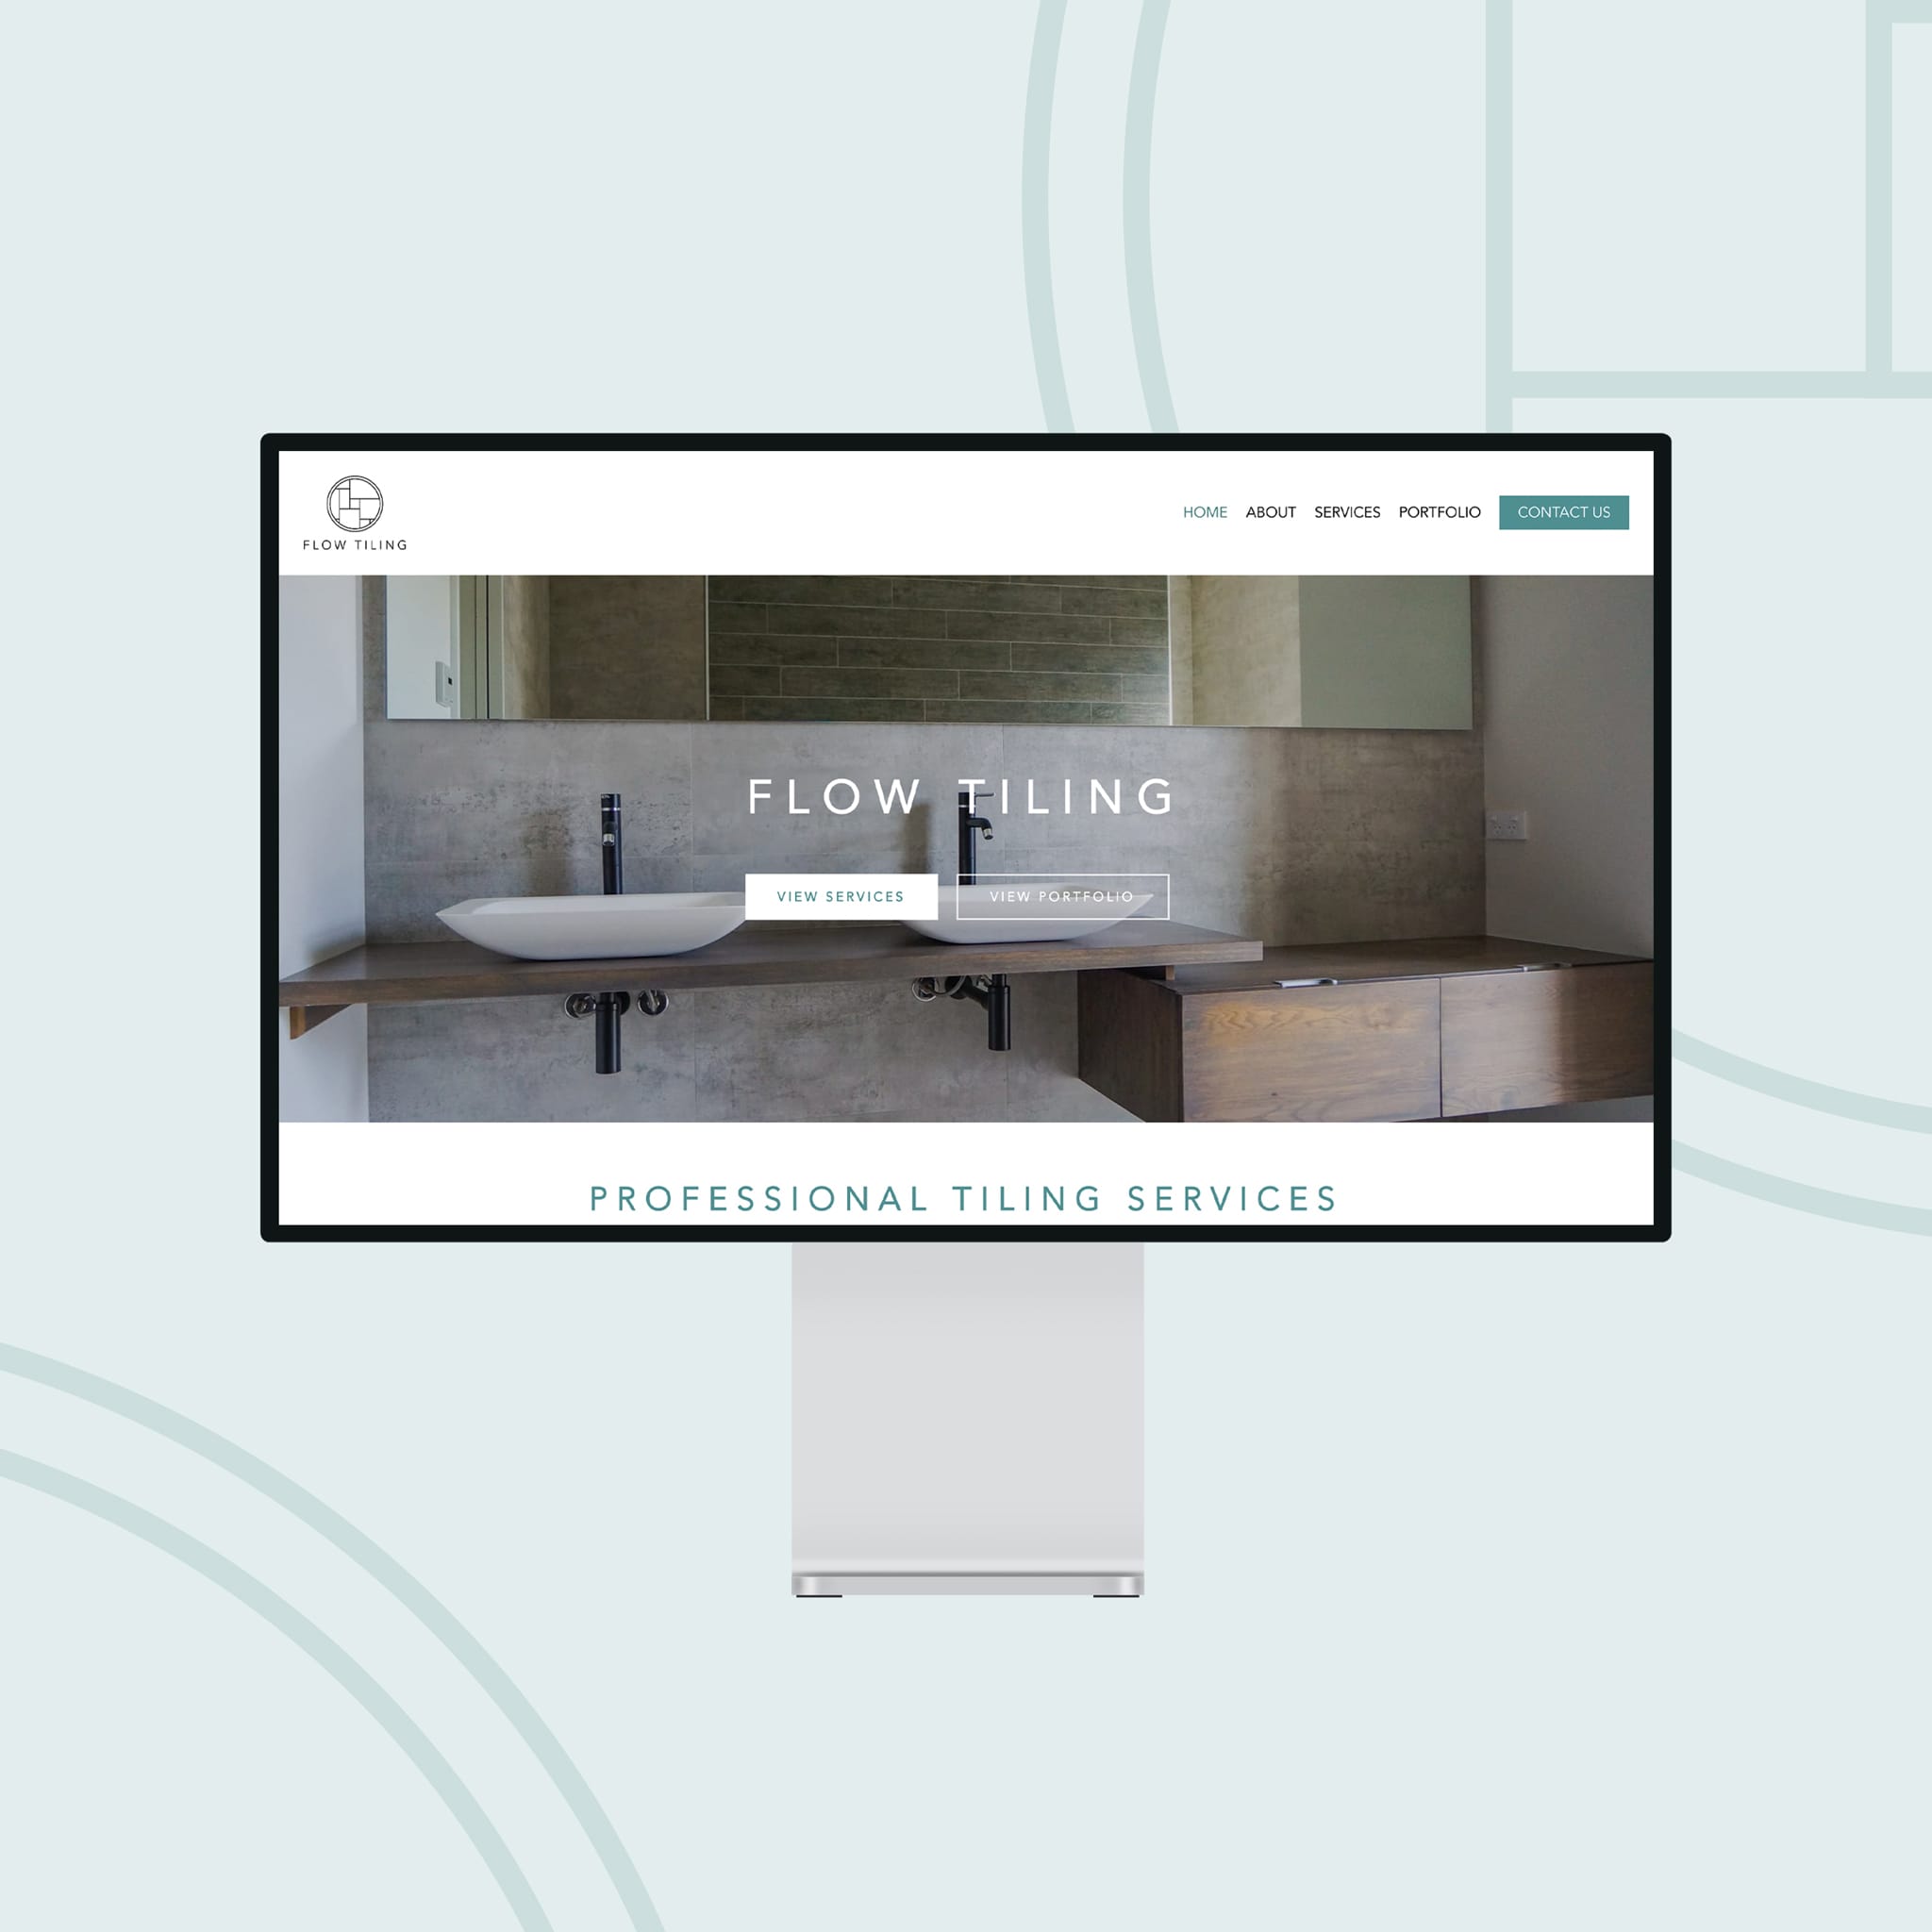 Flow Tiling website design and development in Christchurch by MoMac